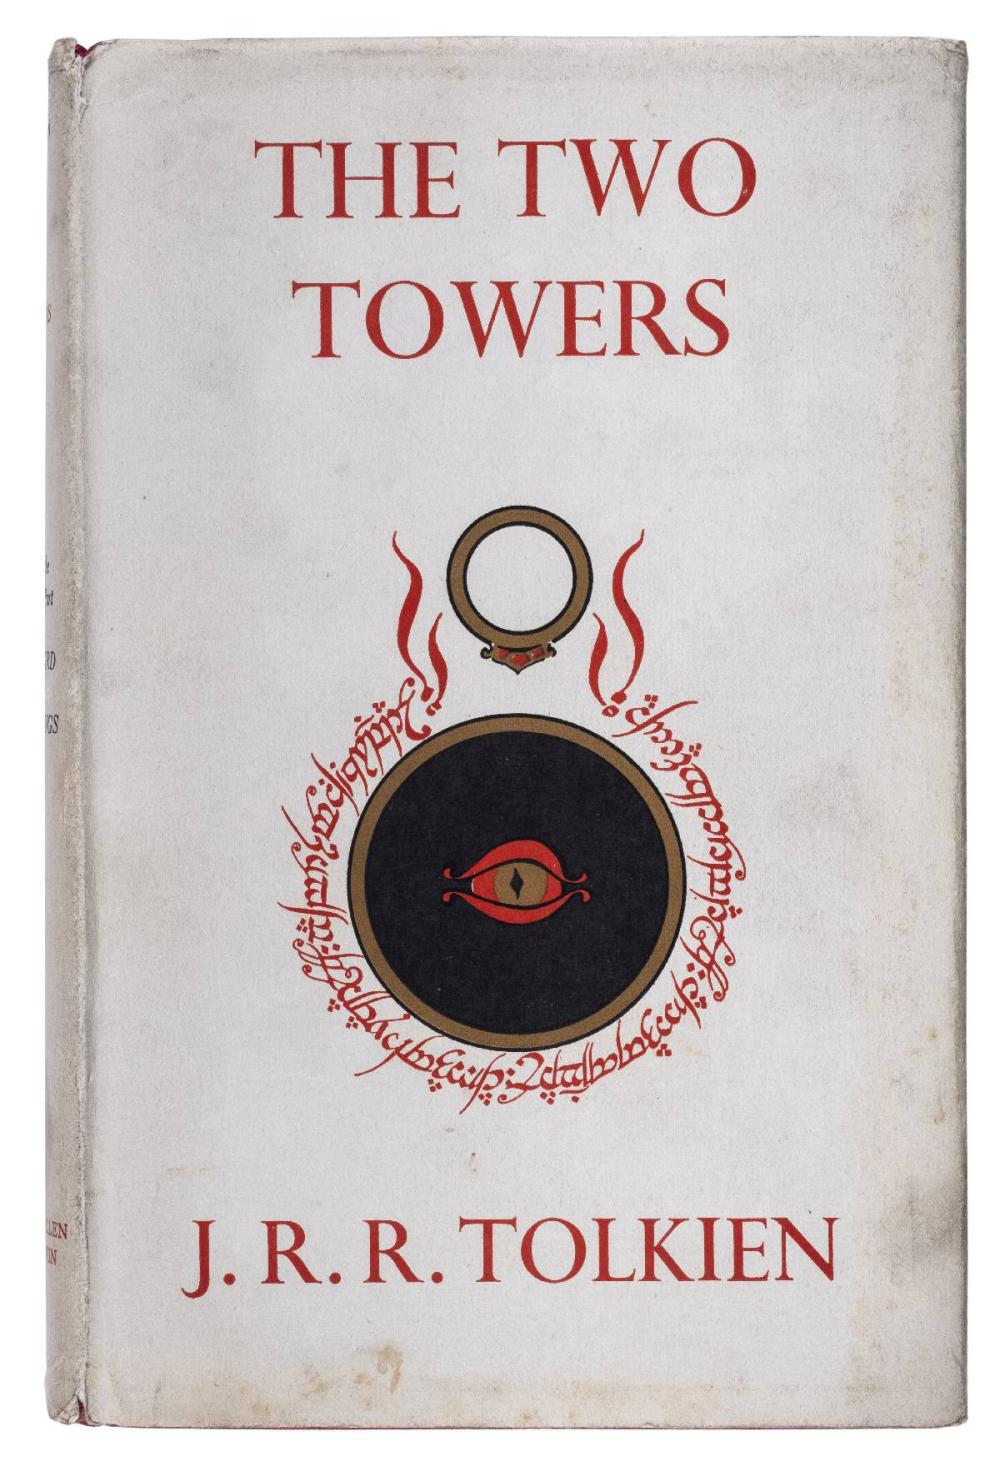 The Two Towers (novel), The One Wiki to Rule Them All